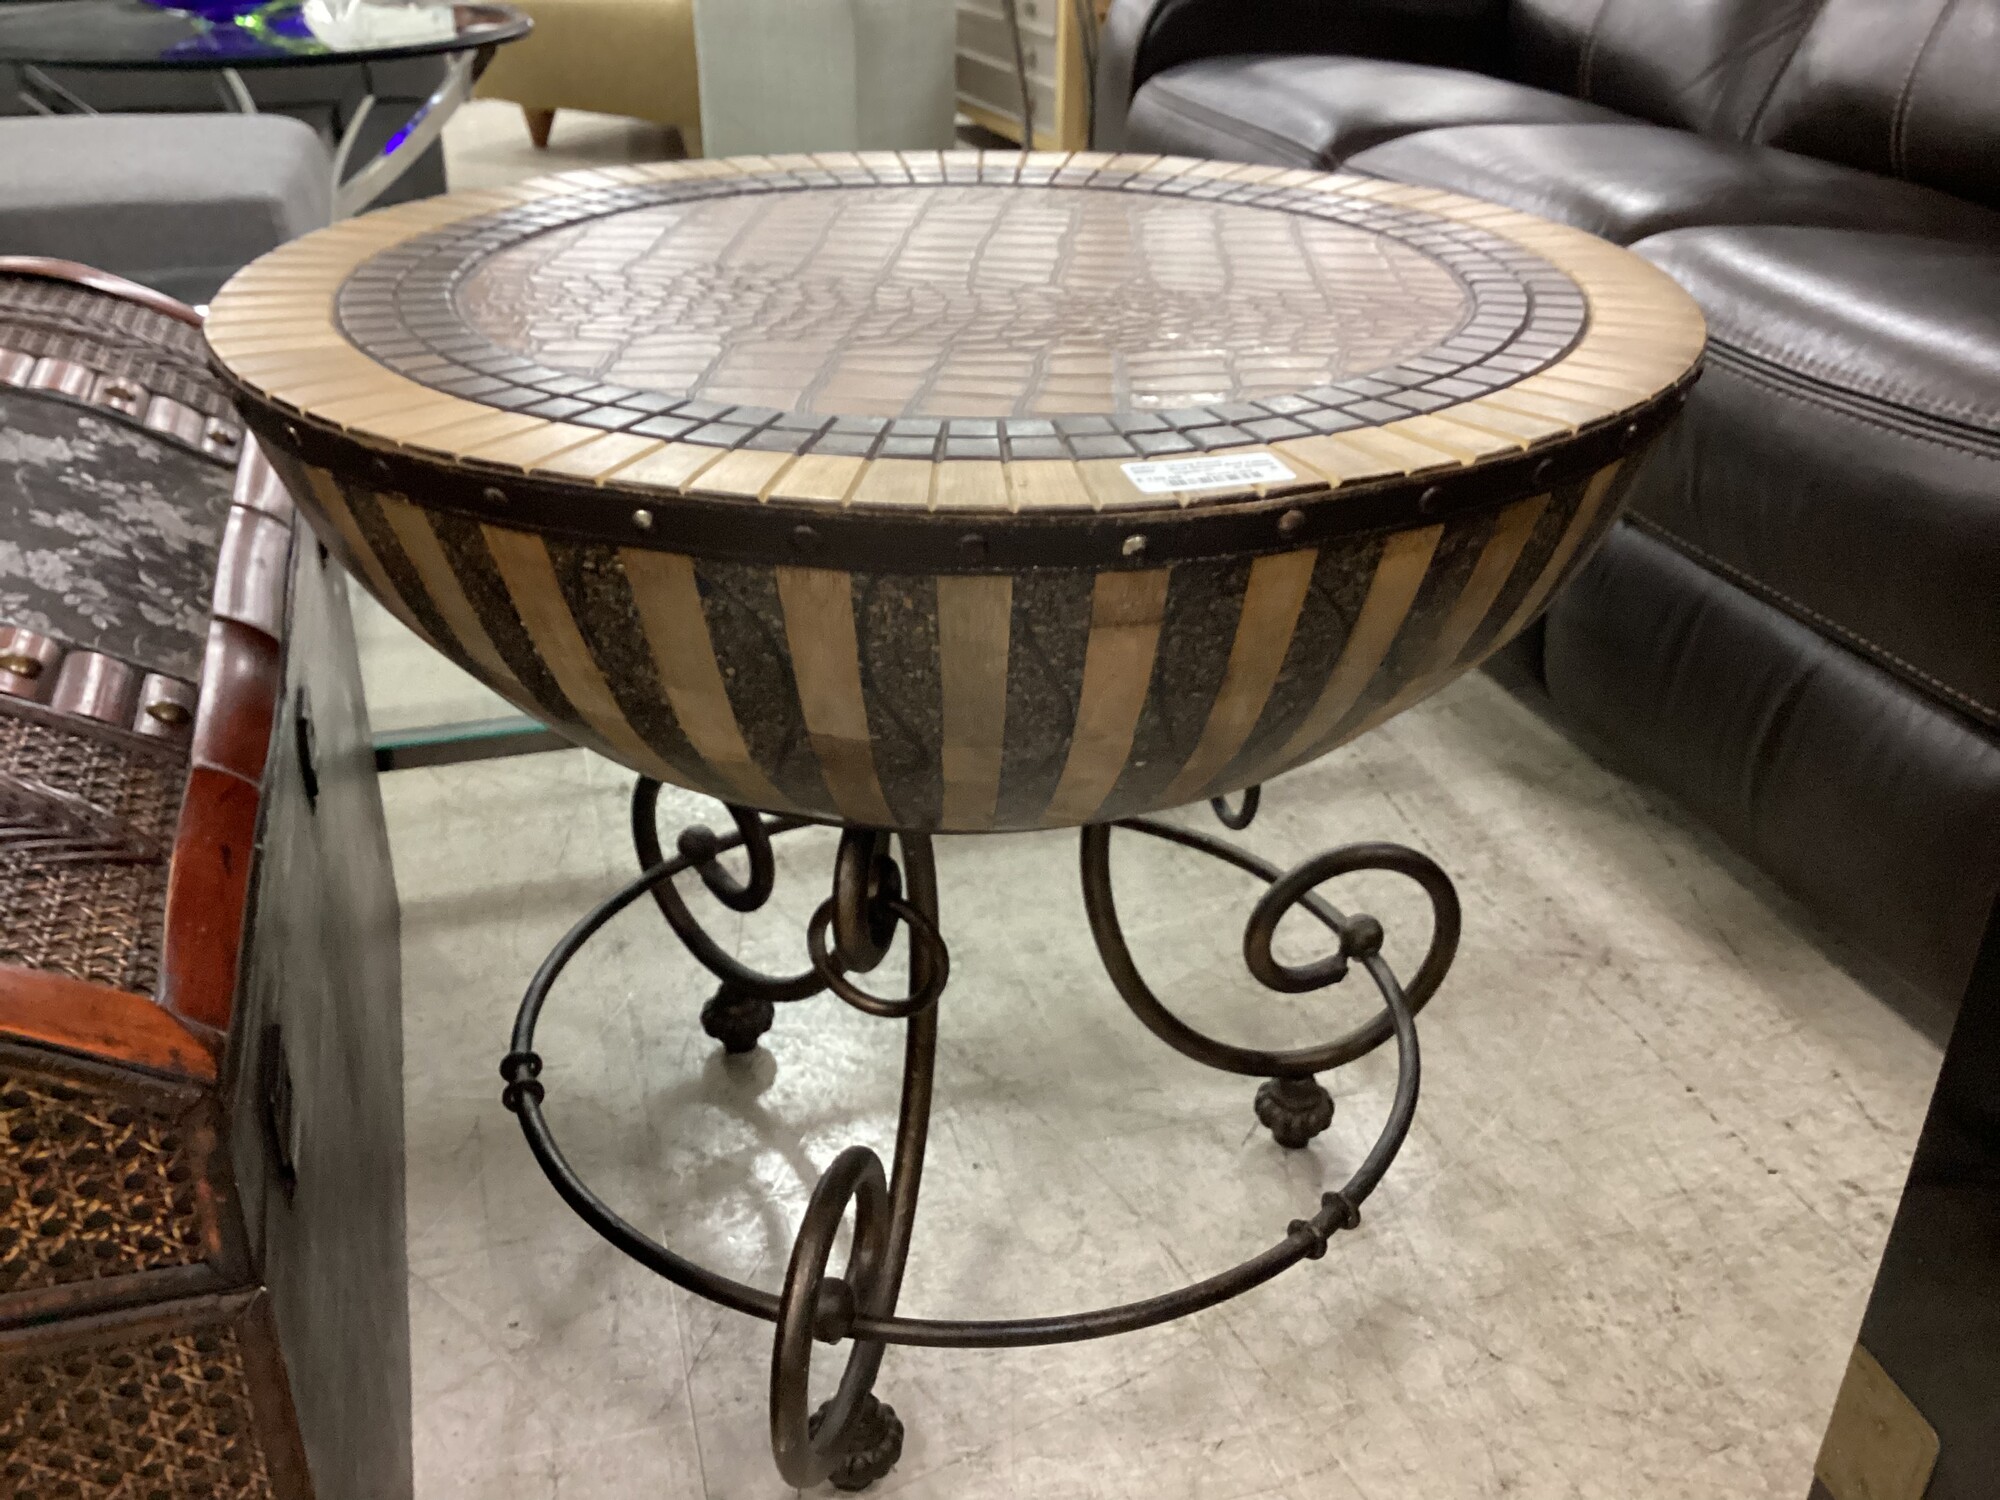 Rnd Striped End Table, WghtIron, Drum Like
29 in Wide x 24 in Tall